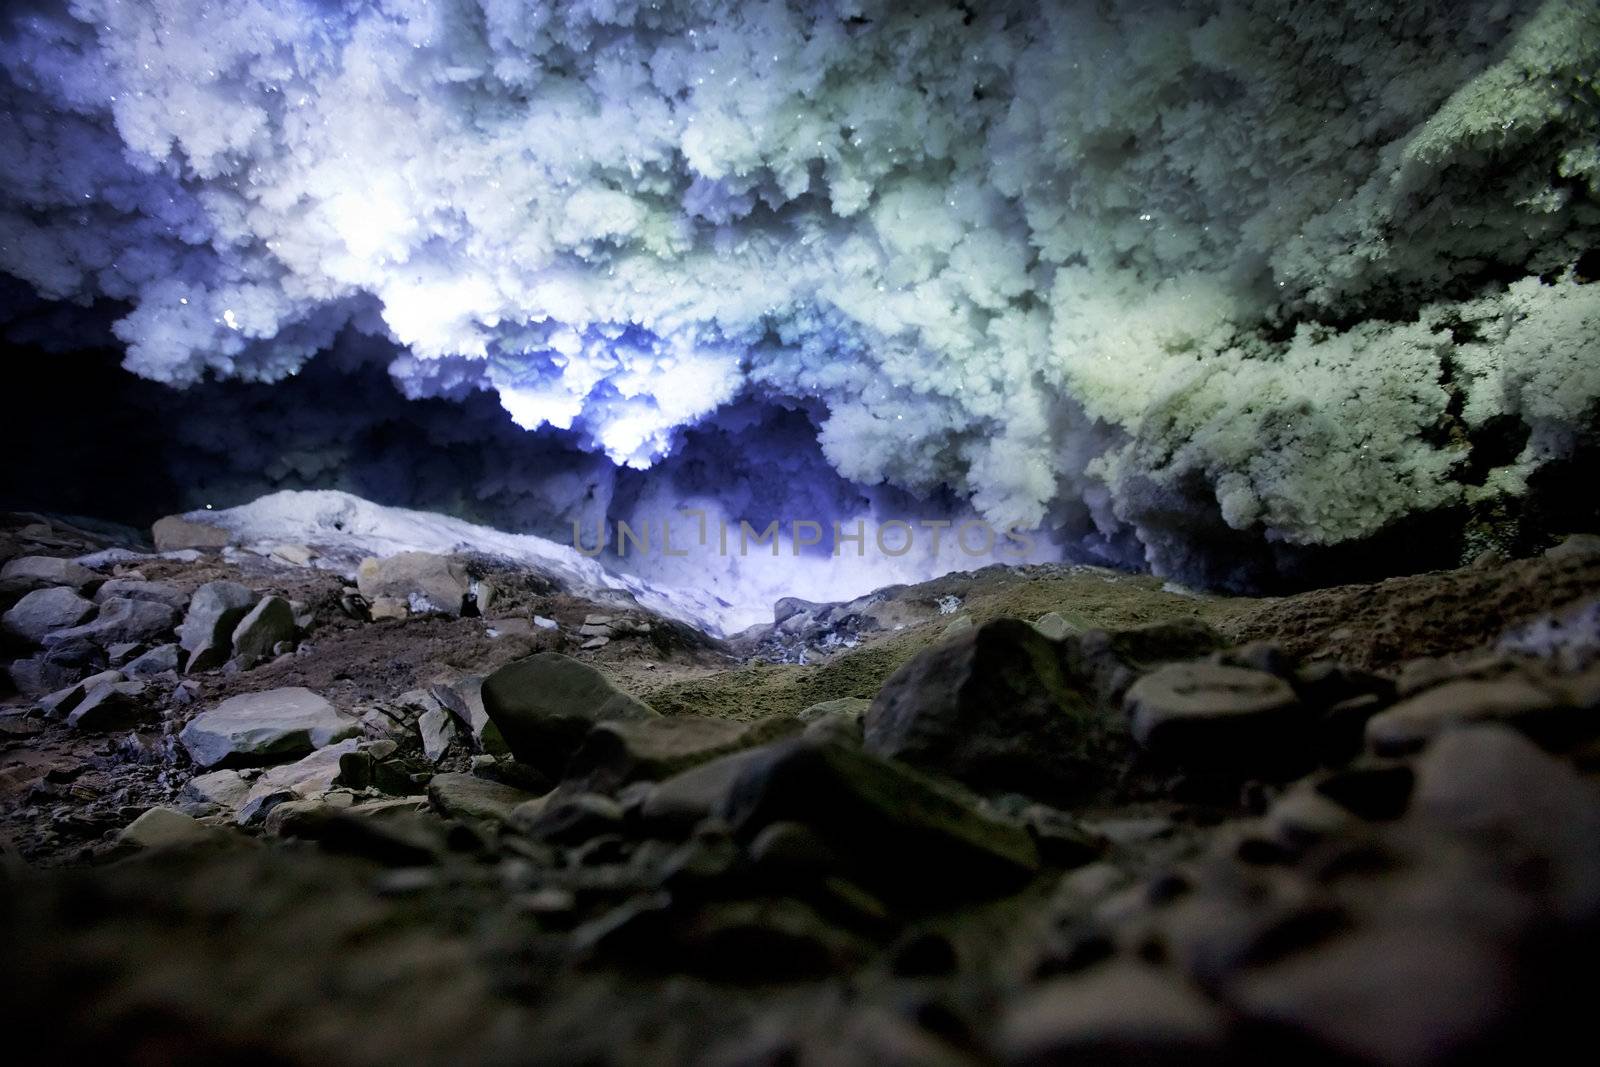 A dark and mysterious snow ice cave - A glacial grotto